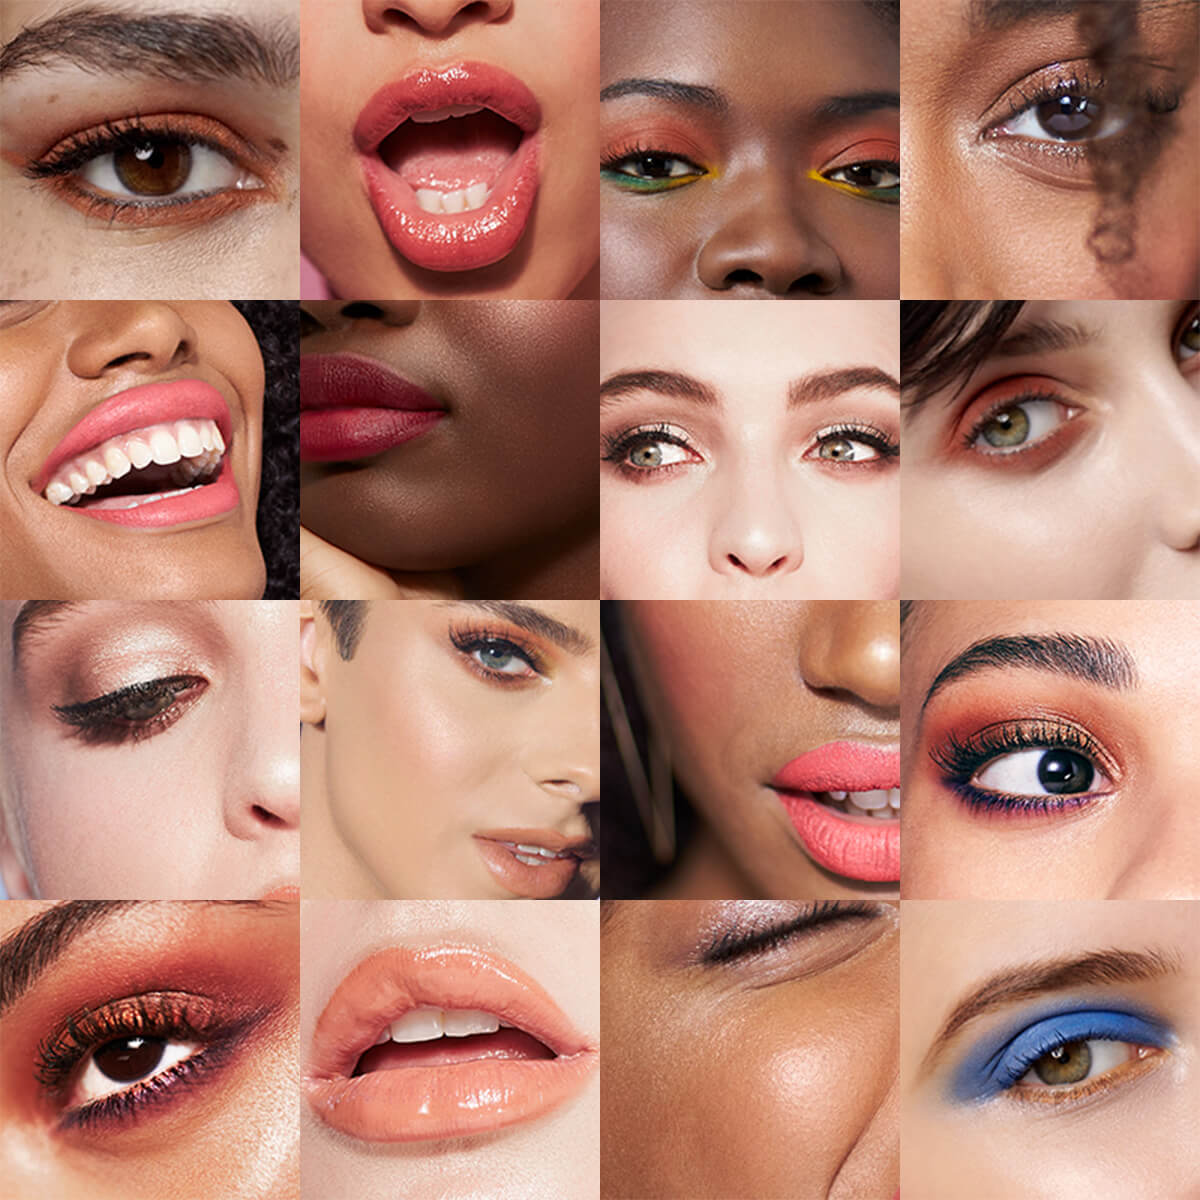 Collage of different men and women showing eyes, lips and face